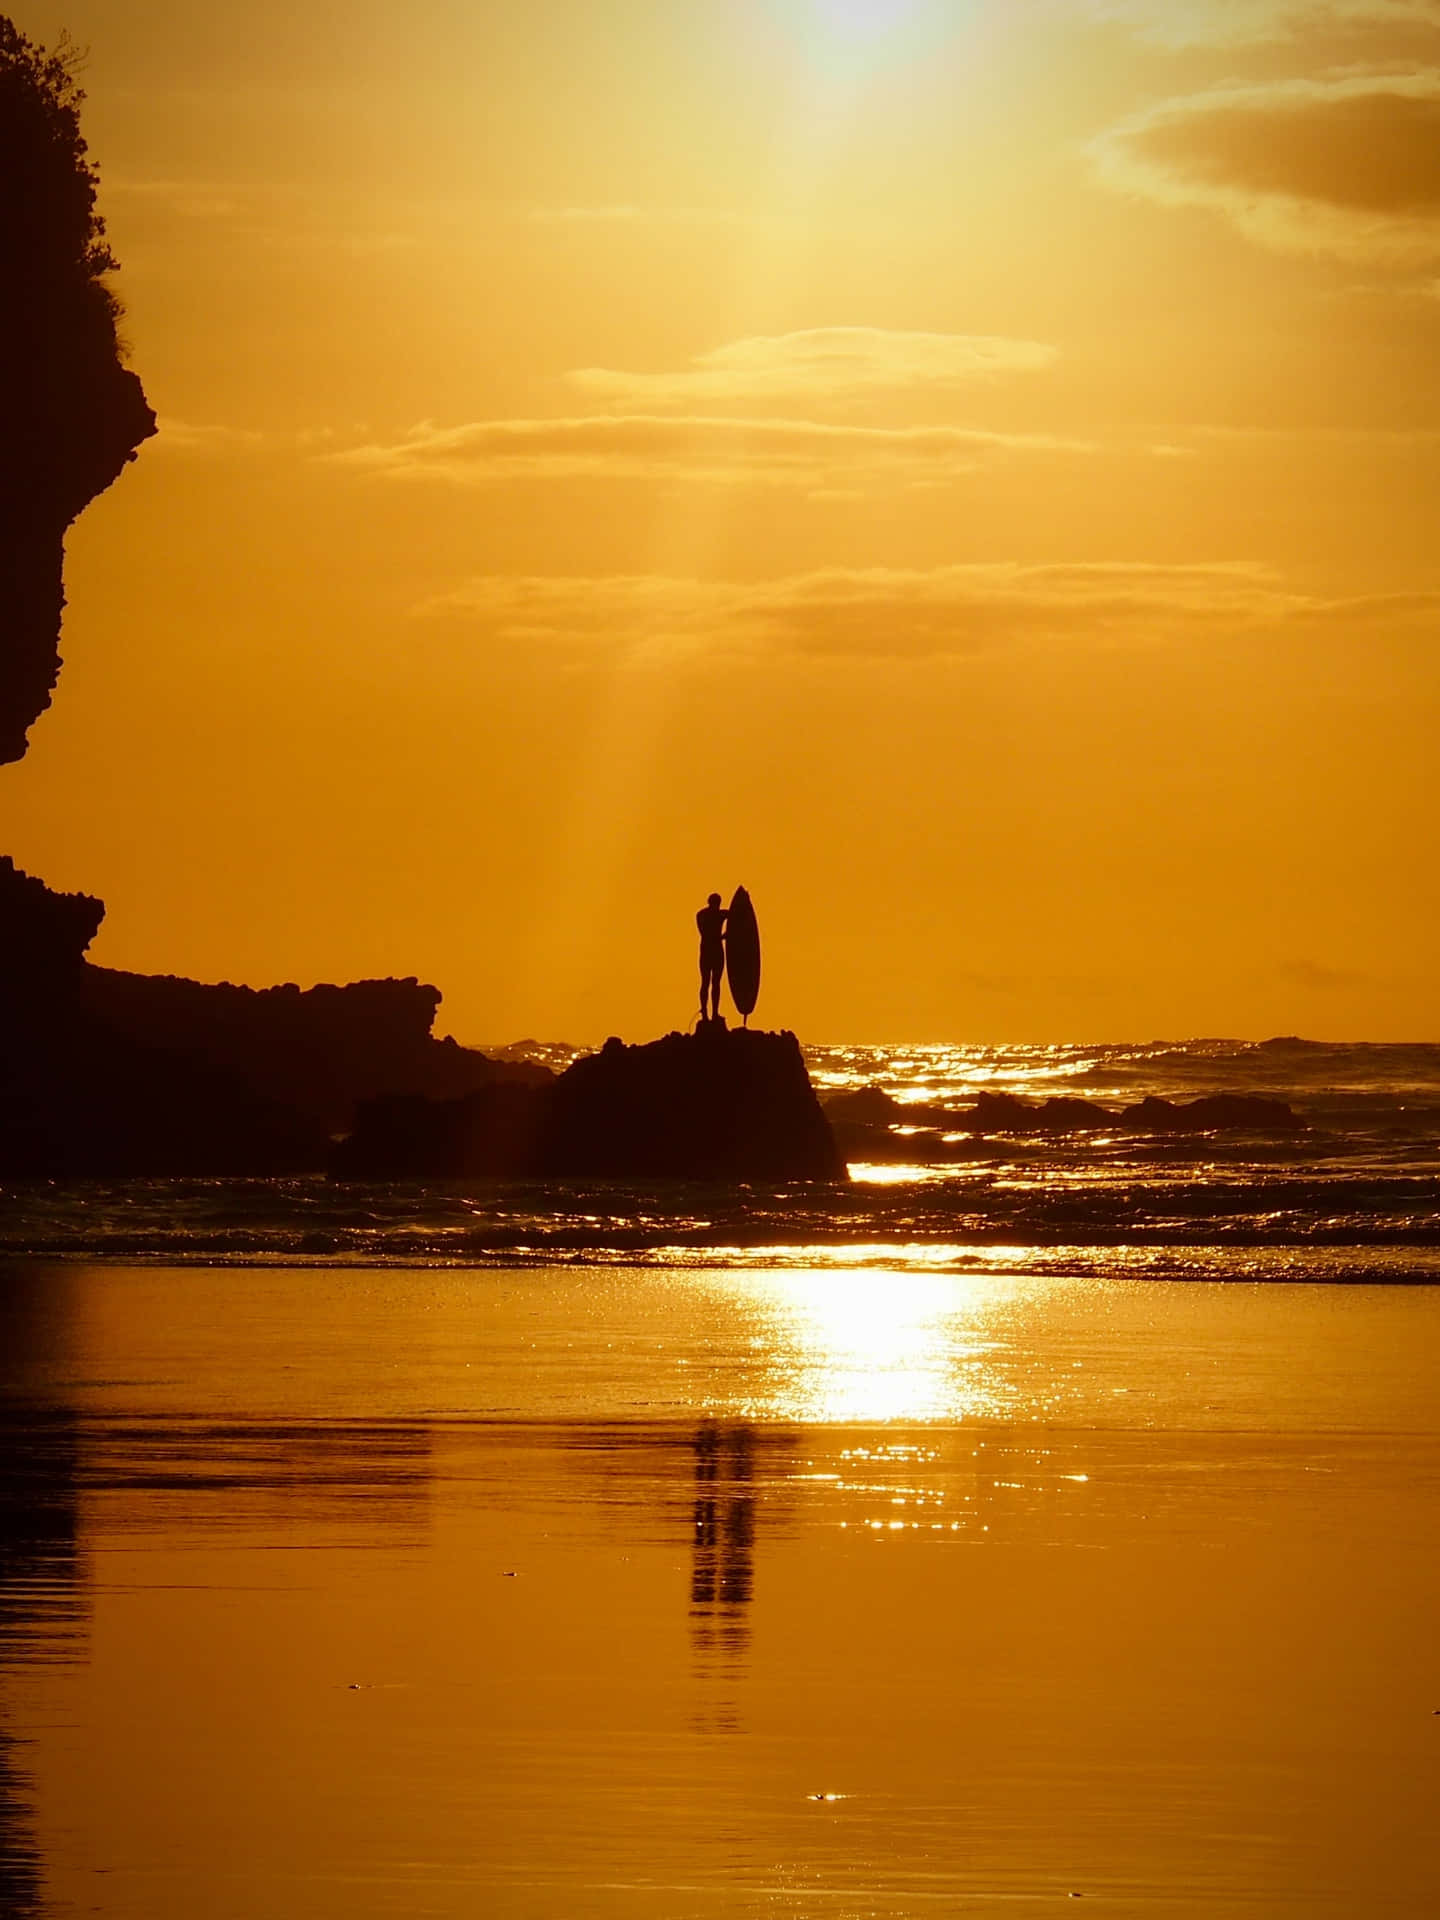 Caption: A picturesque Yellow Beach scene at sunset Wallpaper